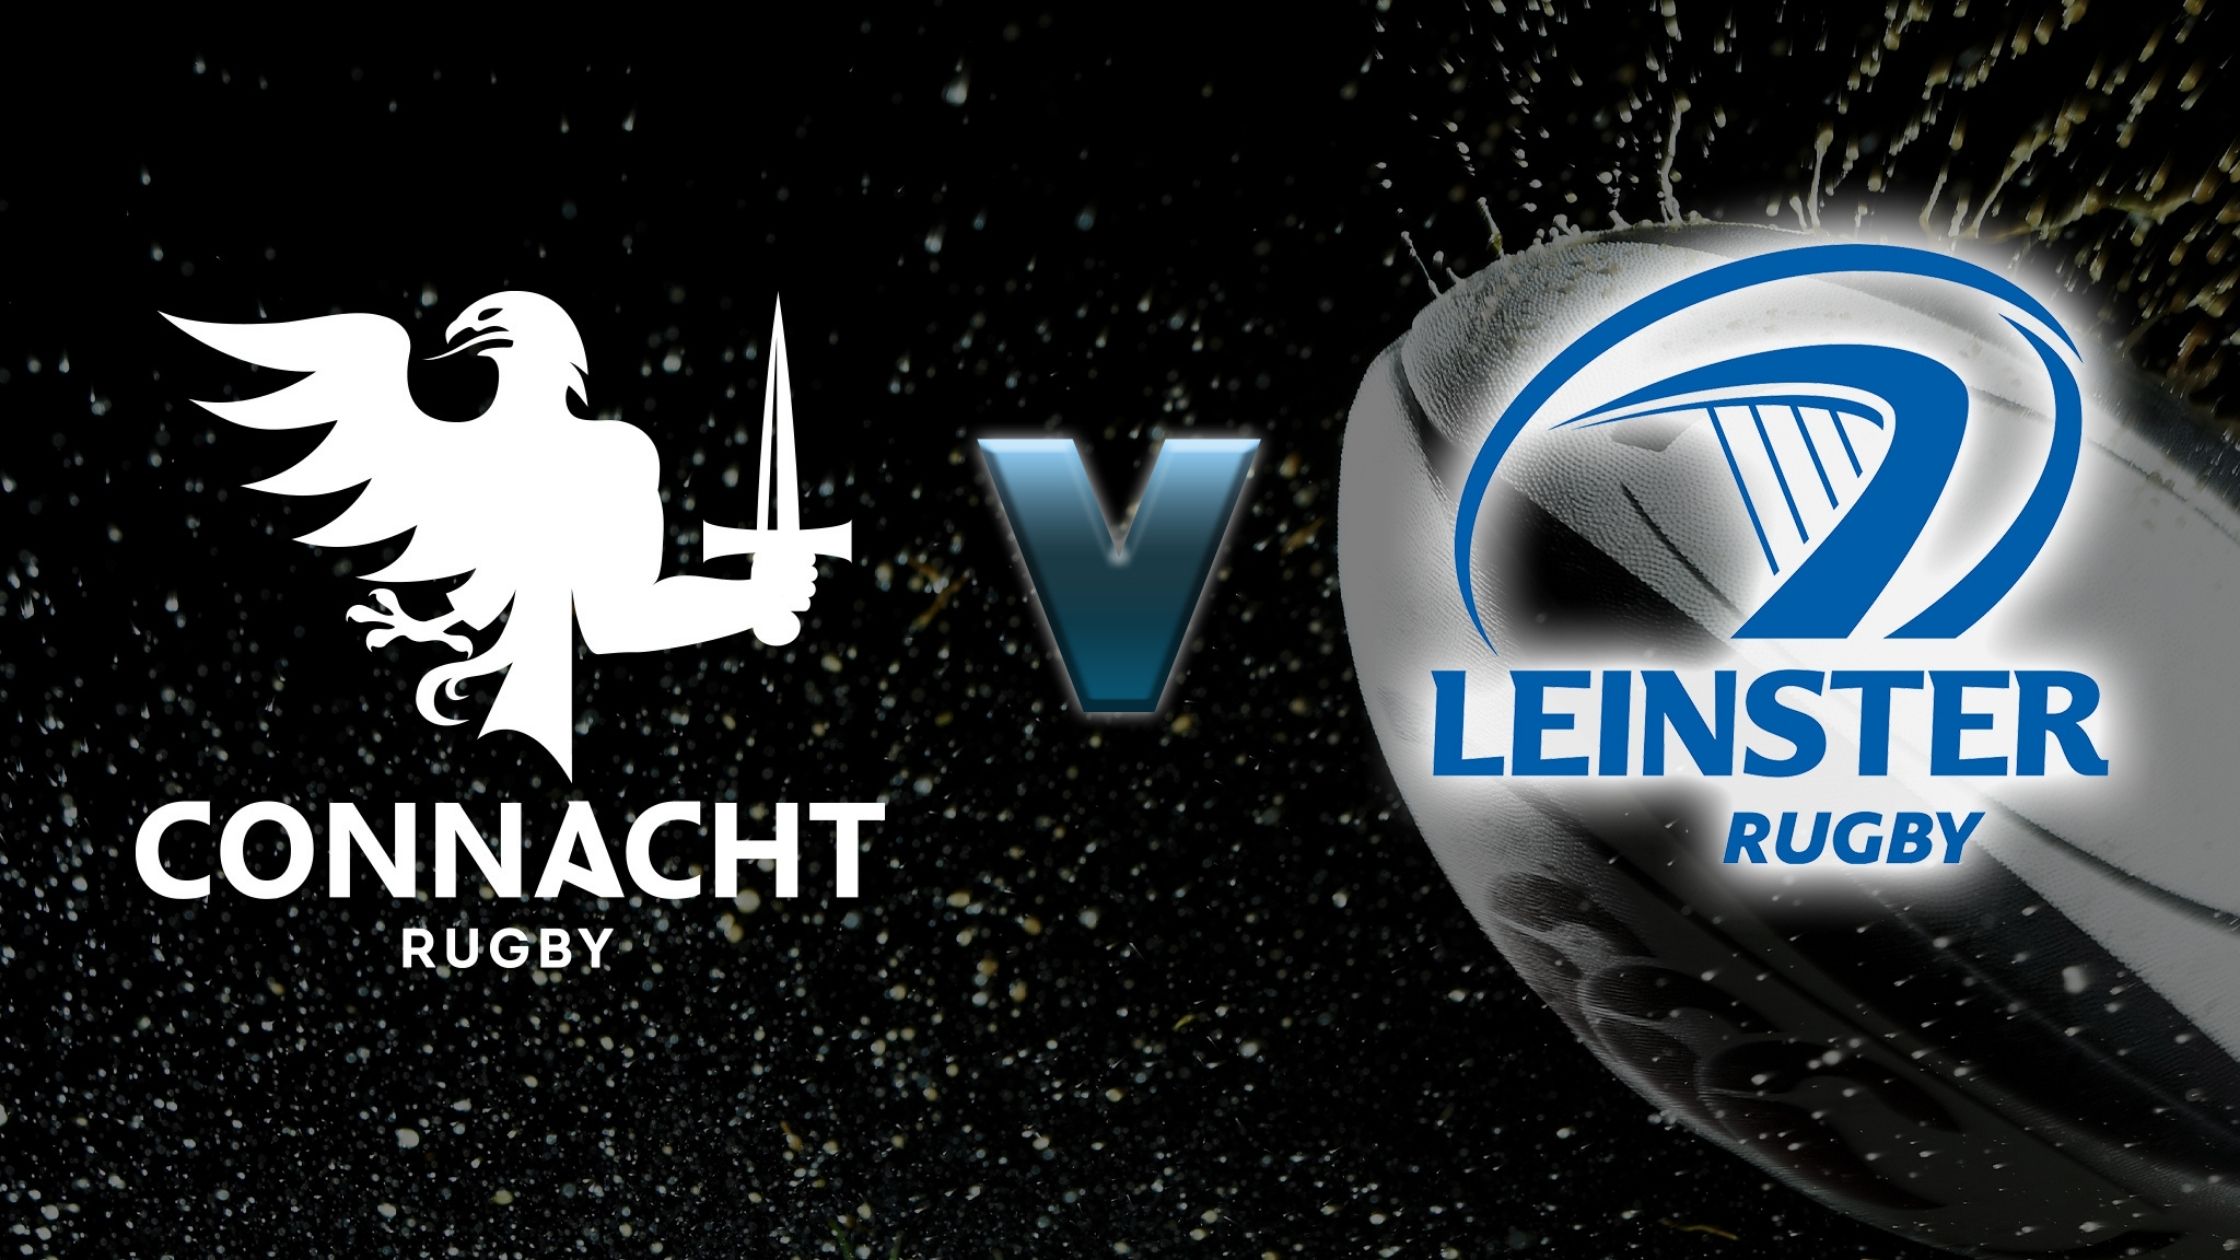 connacht rugby vs leinster rugby